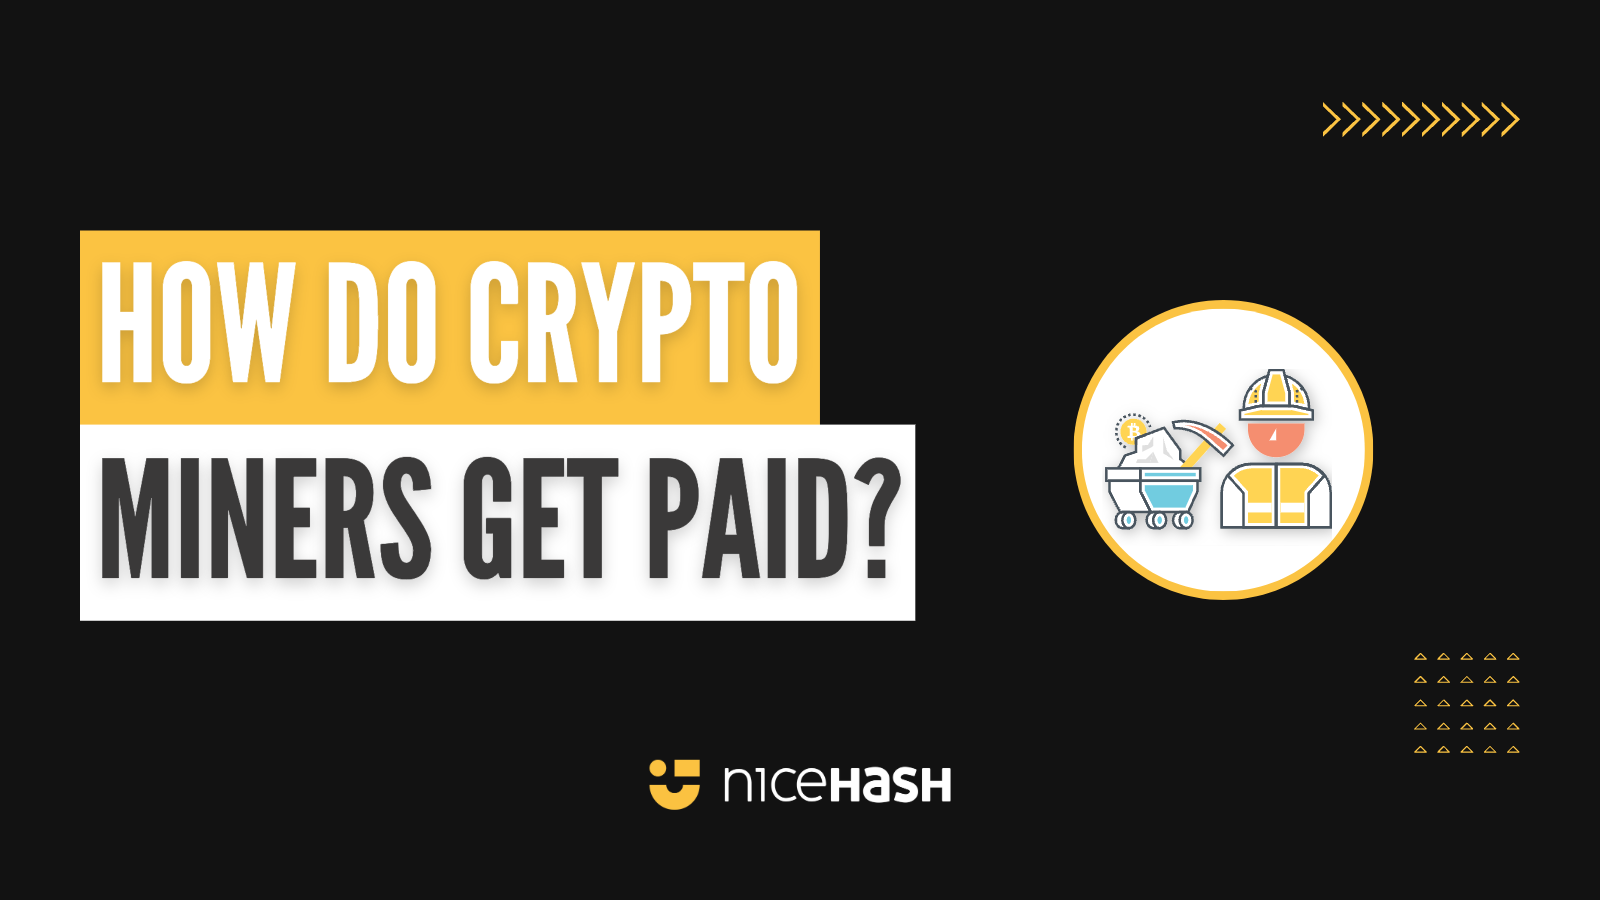 nicehash get paid in ethereum